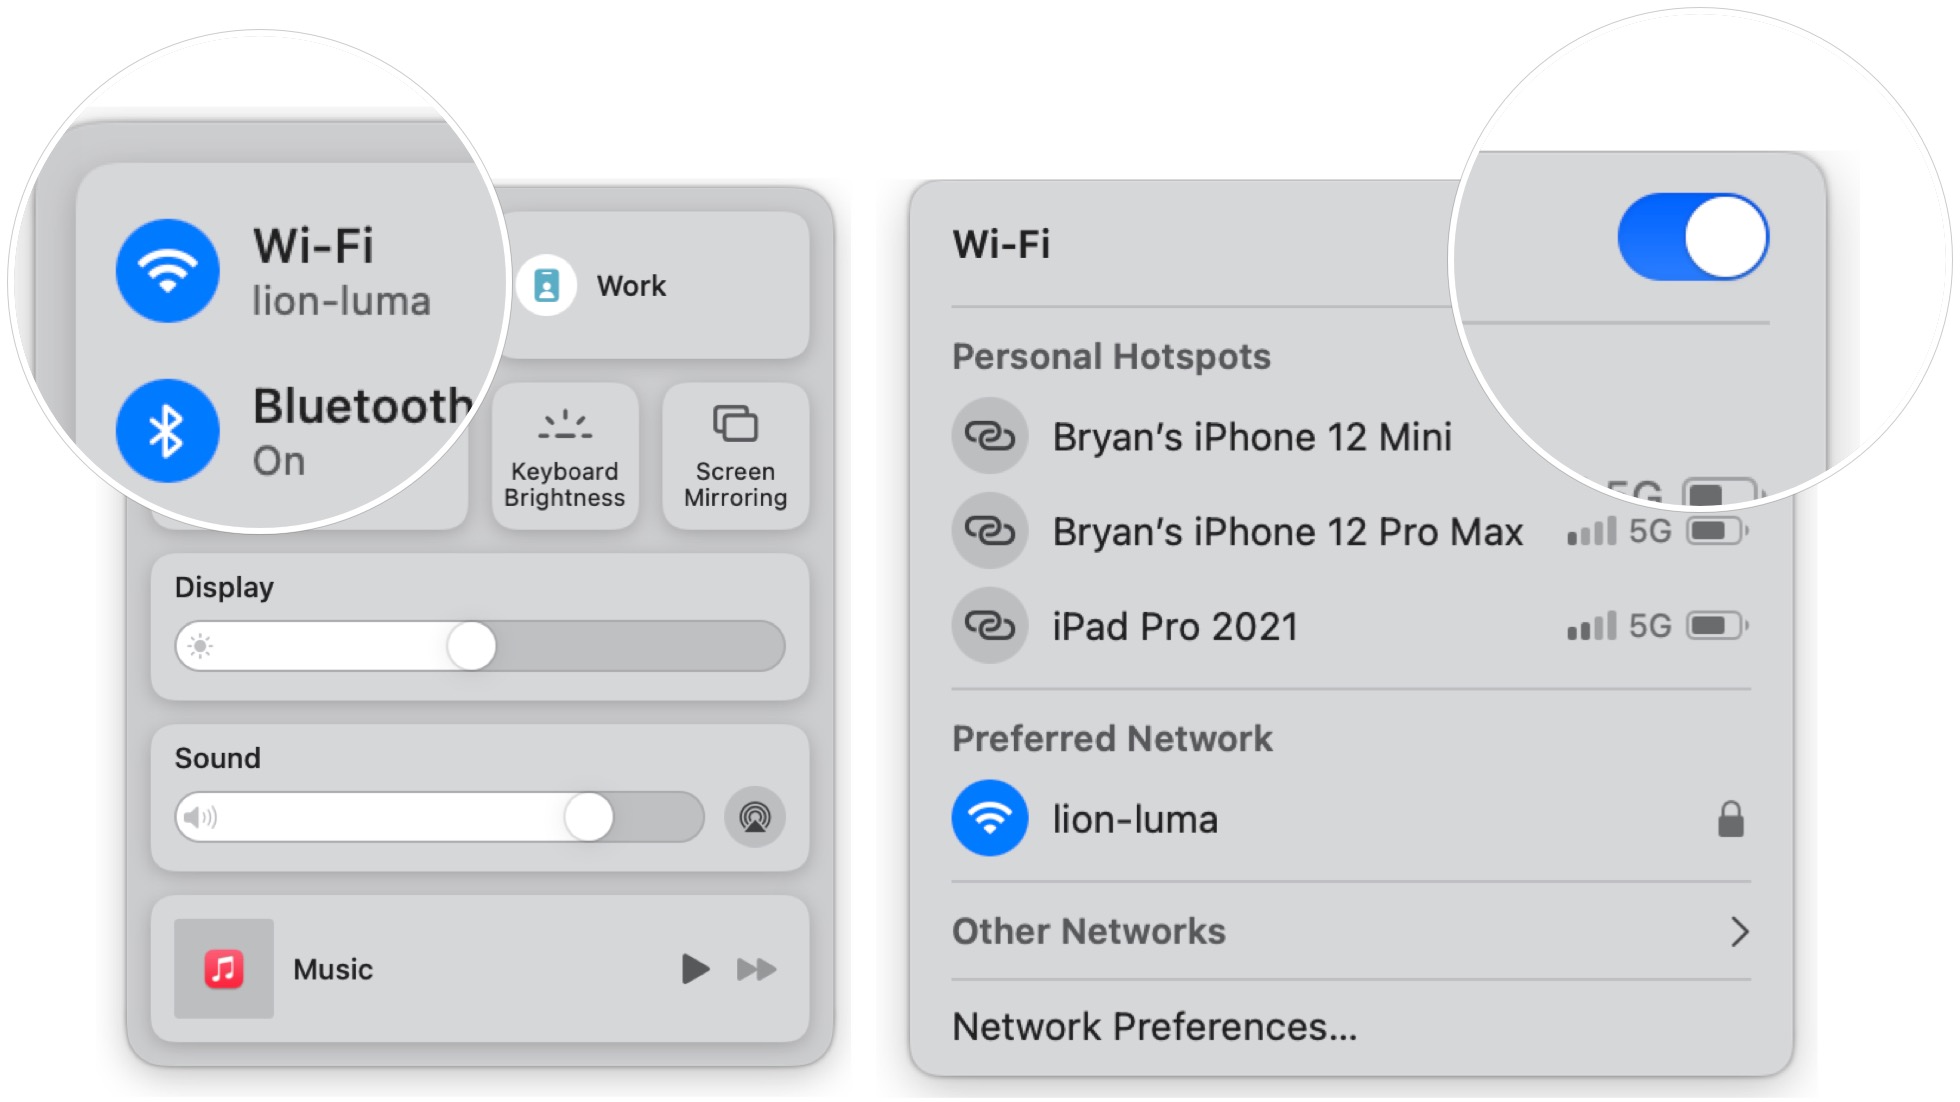 To turn off Bluetooth or Wi-Fi, click the Control Center icon on the menu bar at the top right.  Choose Bluetooth, then toggle off Bluetooth or choose Wi-Fi, then toggle off Wi-Fi.